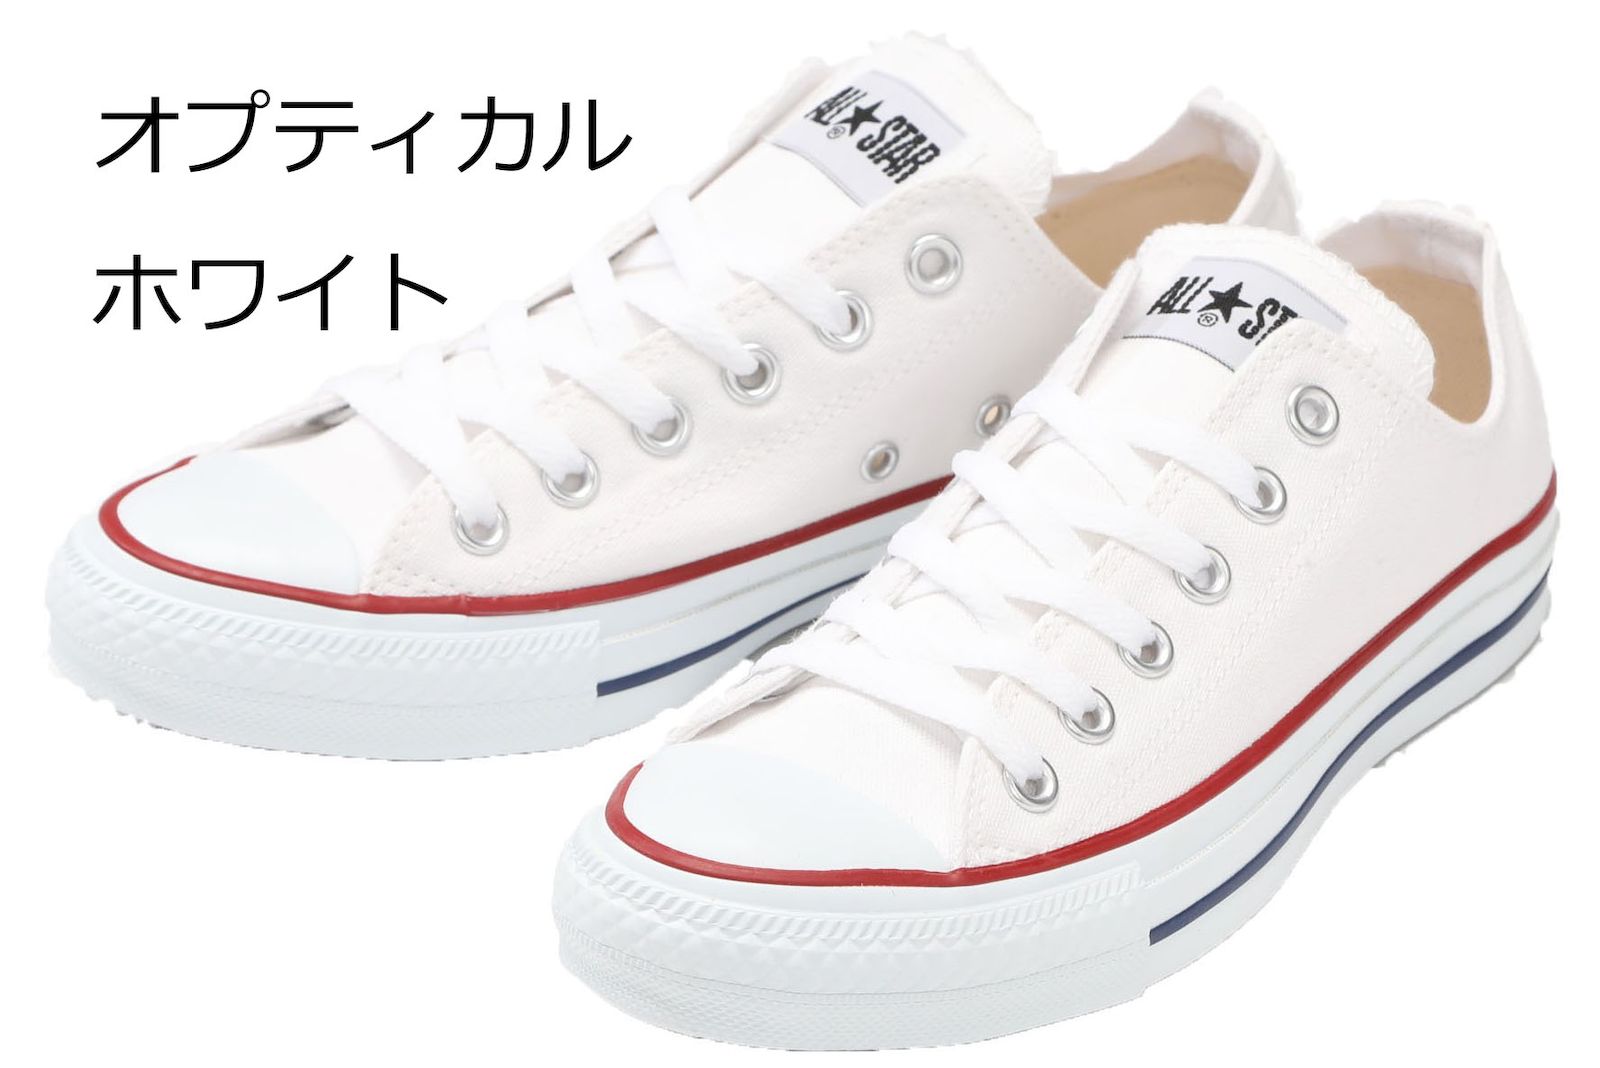 converse all star low youth